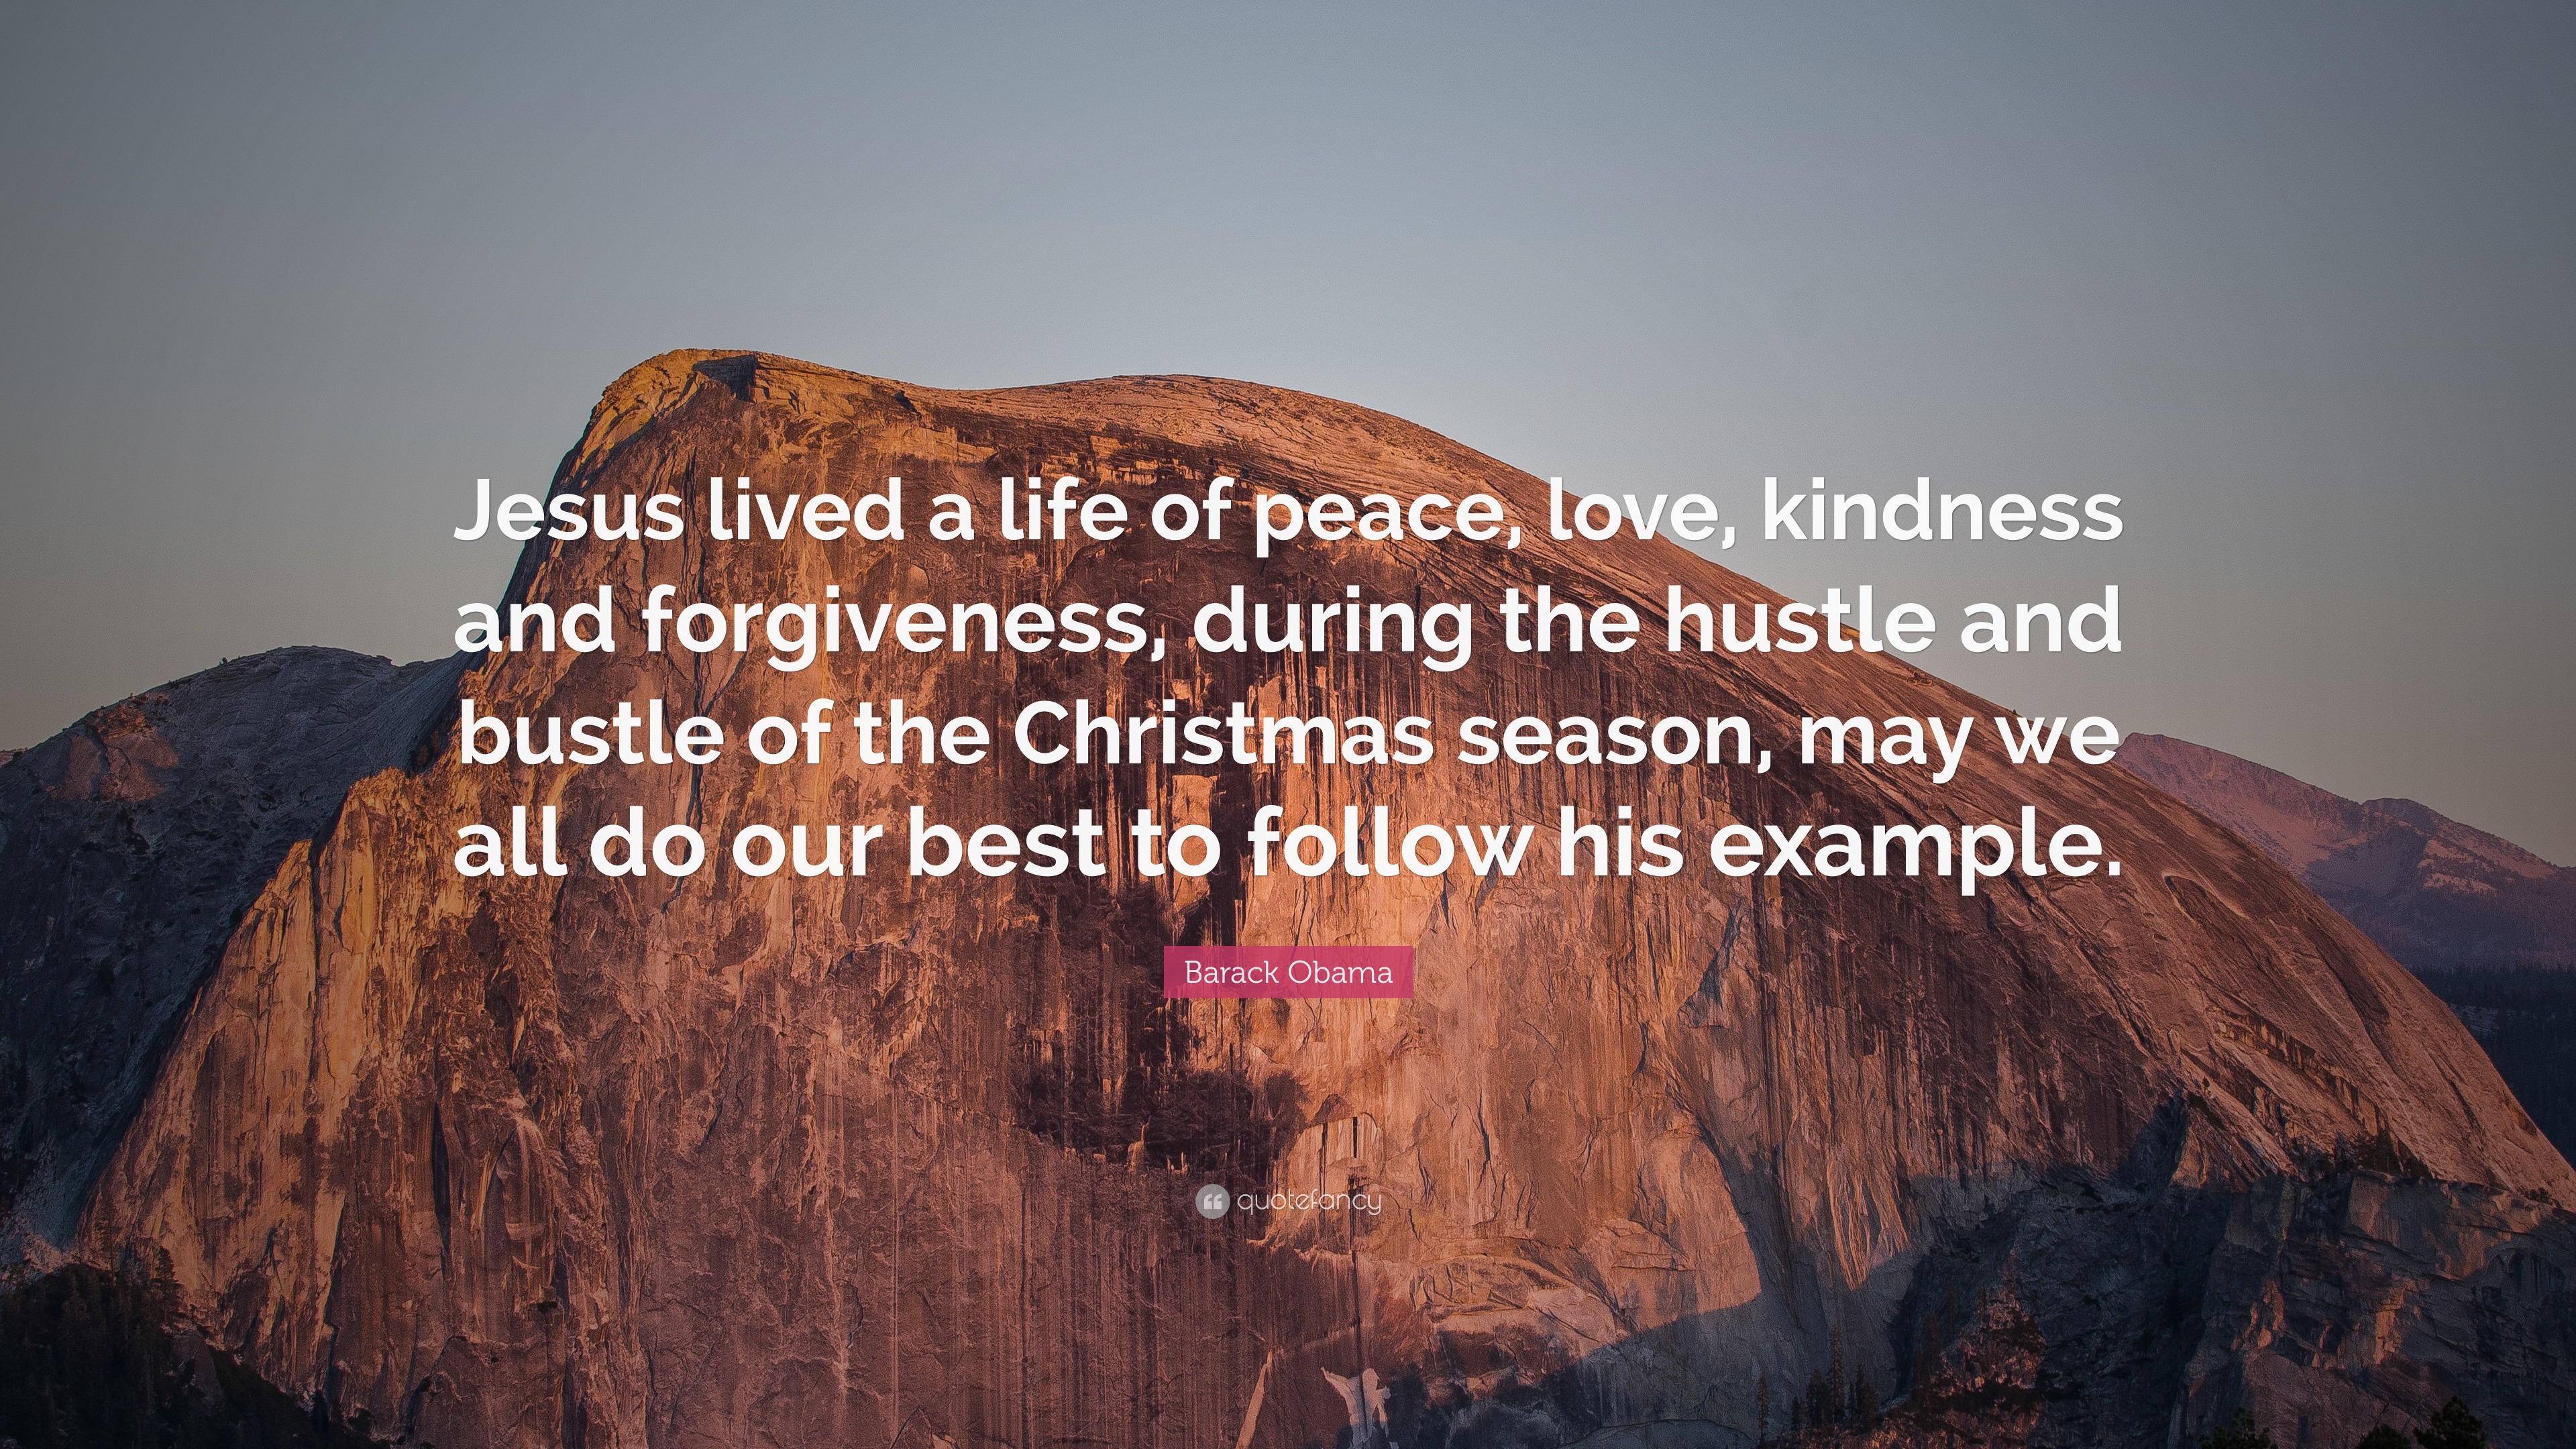 Barack Obama Quote “Jesus lived a life of peace love kindness and